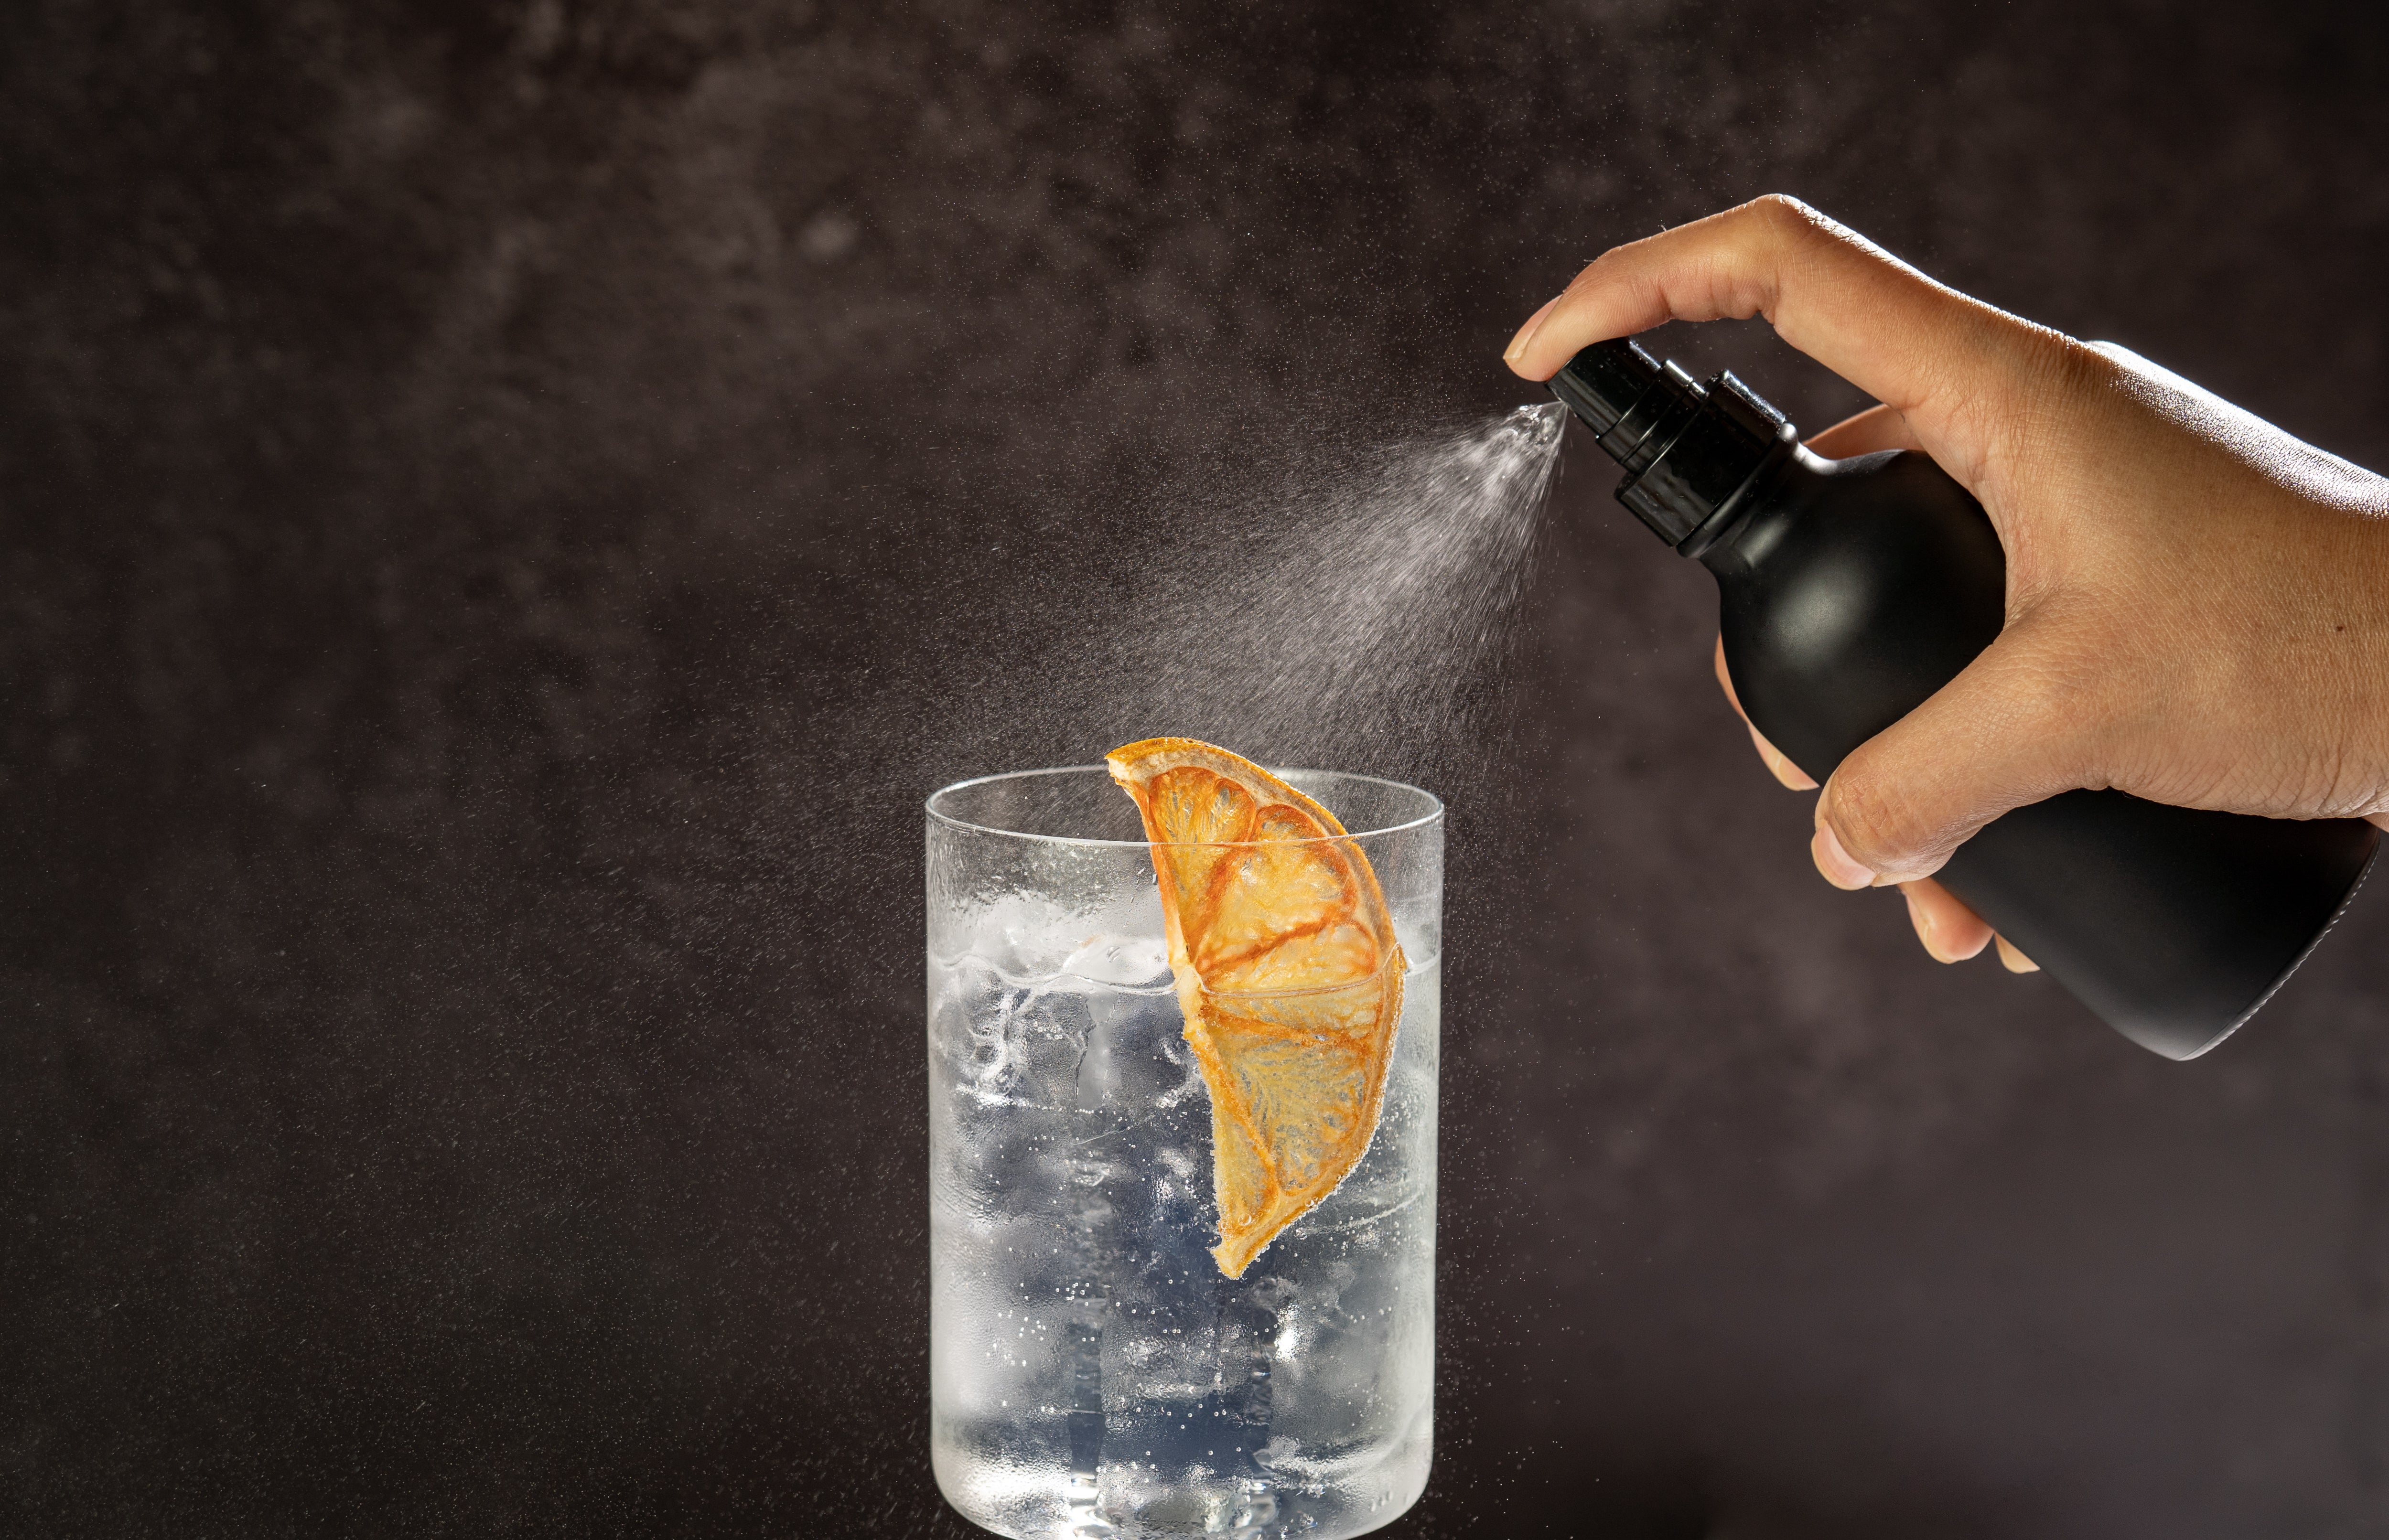 Hand spraying liquid from a black atomizer bottle into a rocks glass with vodka, ice, and dried orange garnish, against a brown backdrop